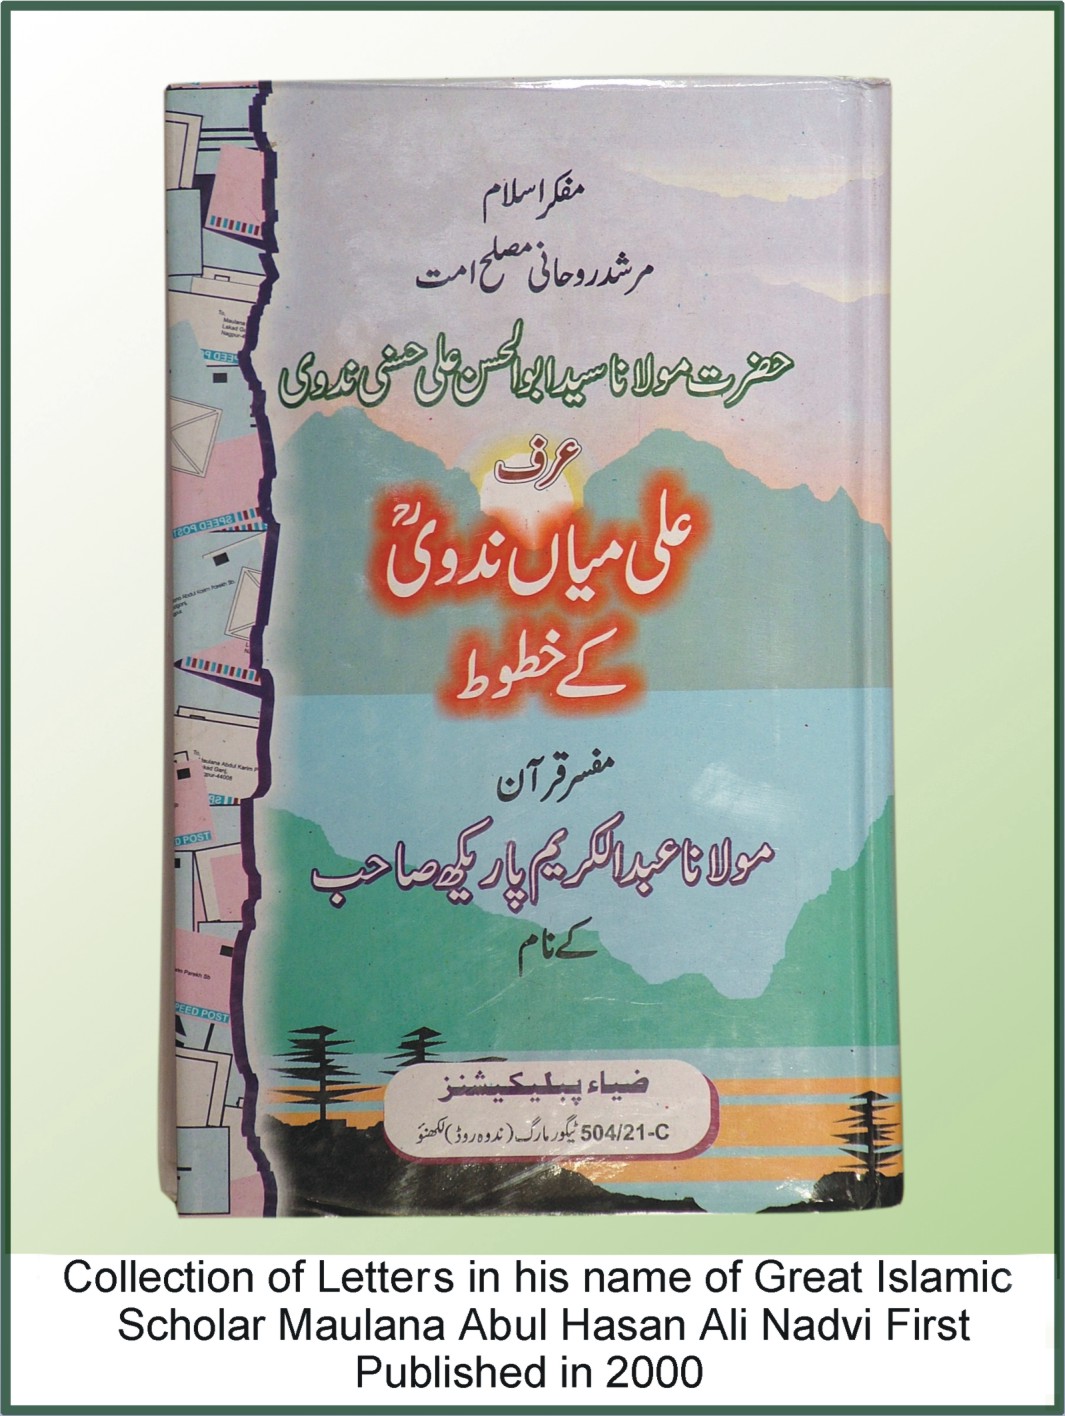 Collection of Letters in his name from the Great Islamic Scholar Maulana Abul Hasan Ali Nadvi, First Published in 2000